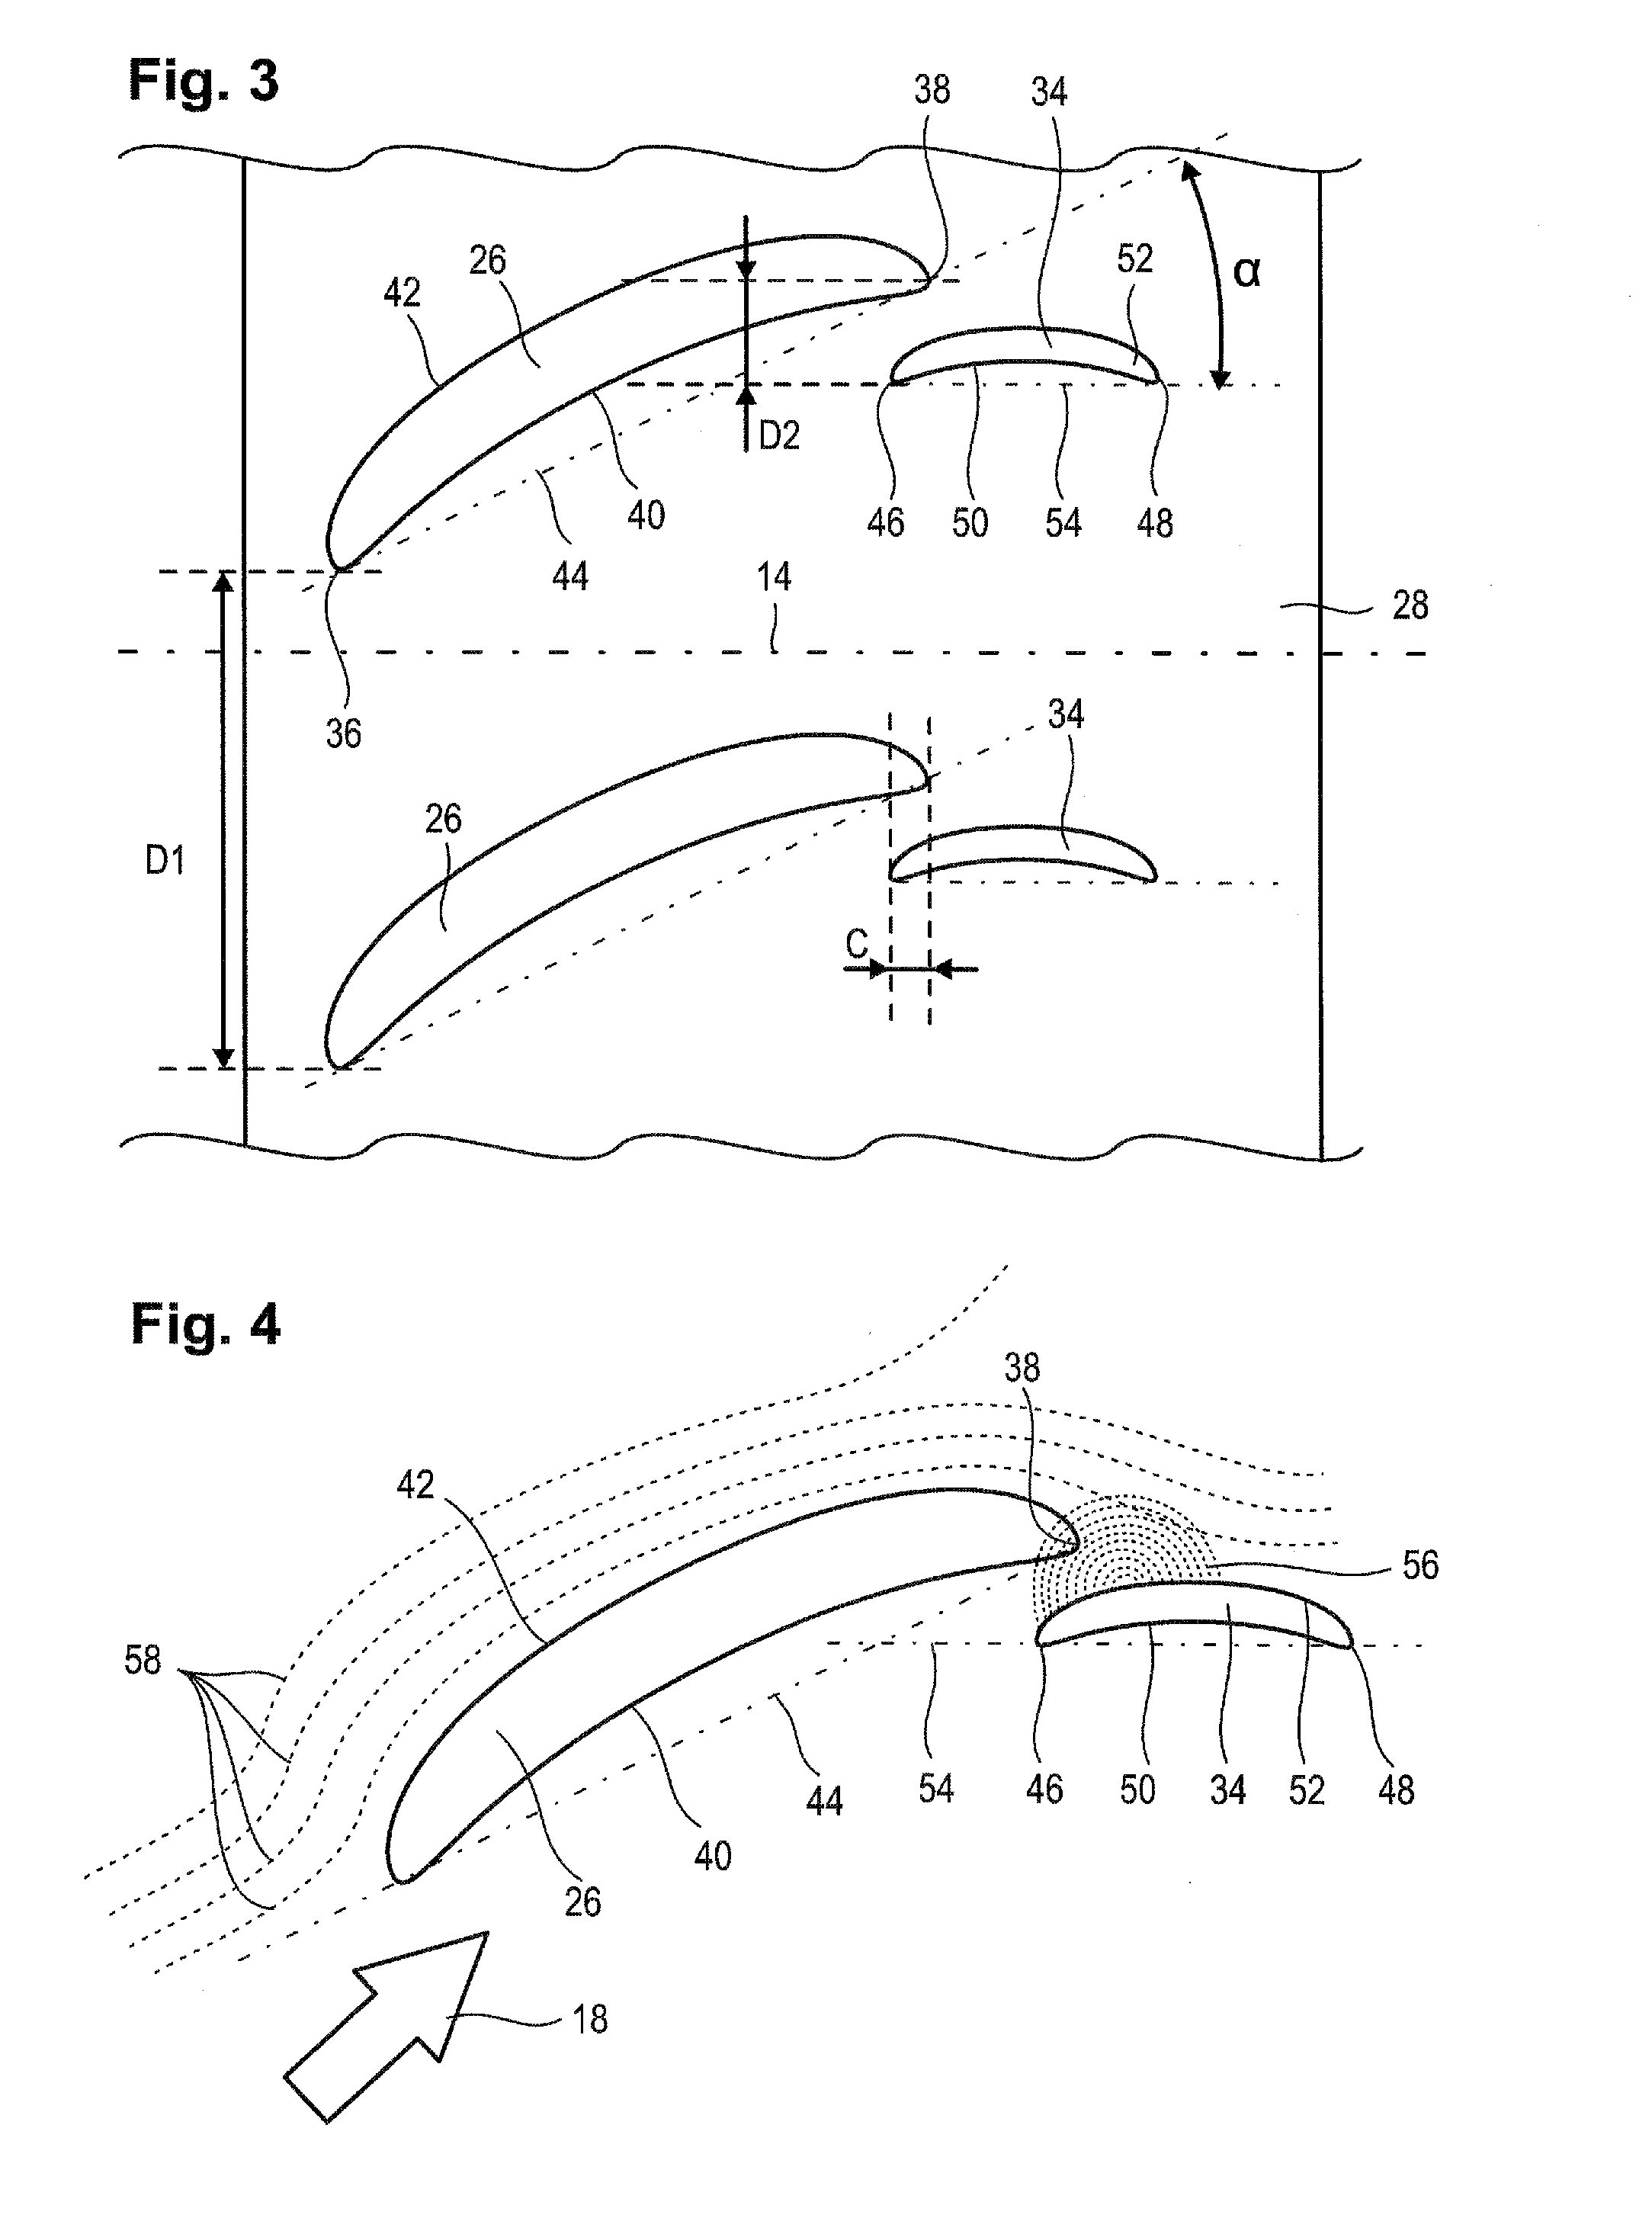 Axial Turbomachine Stator with Ailerons at the Blade Roots